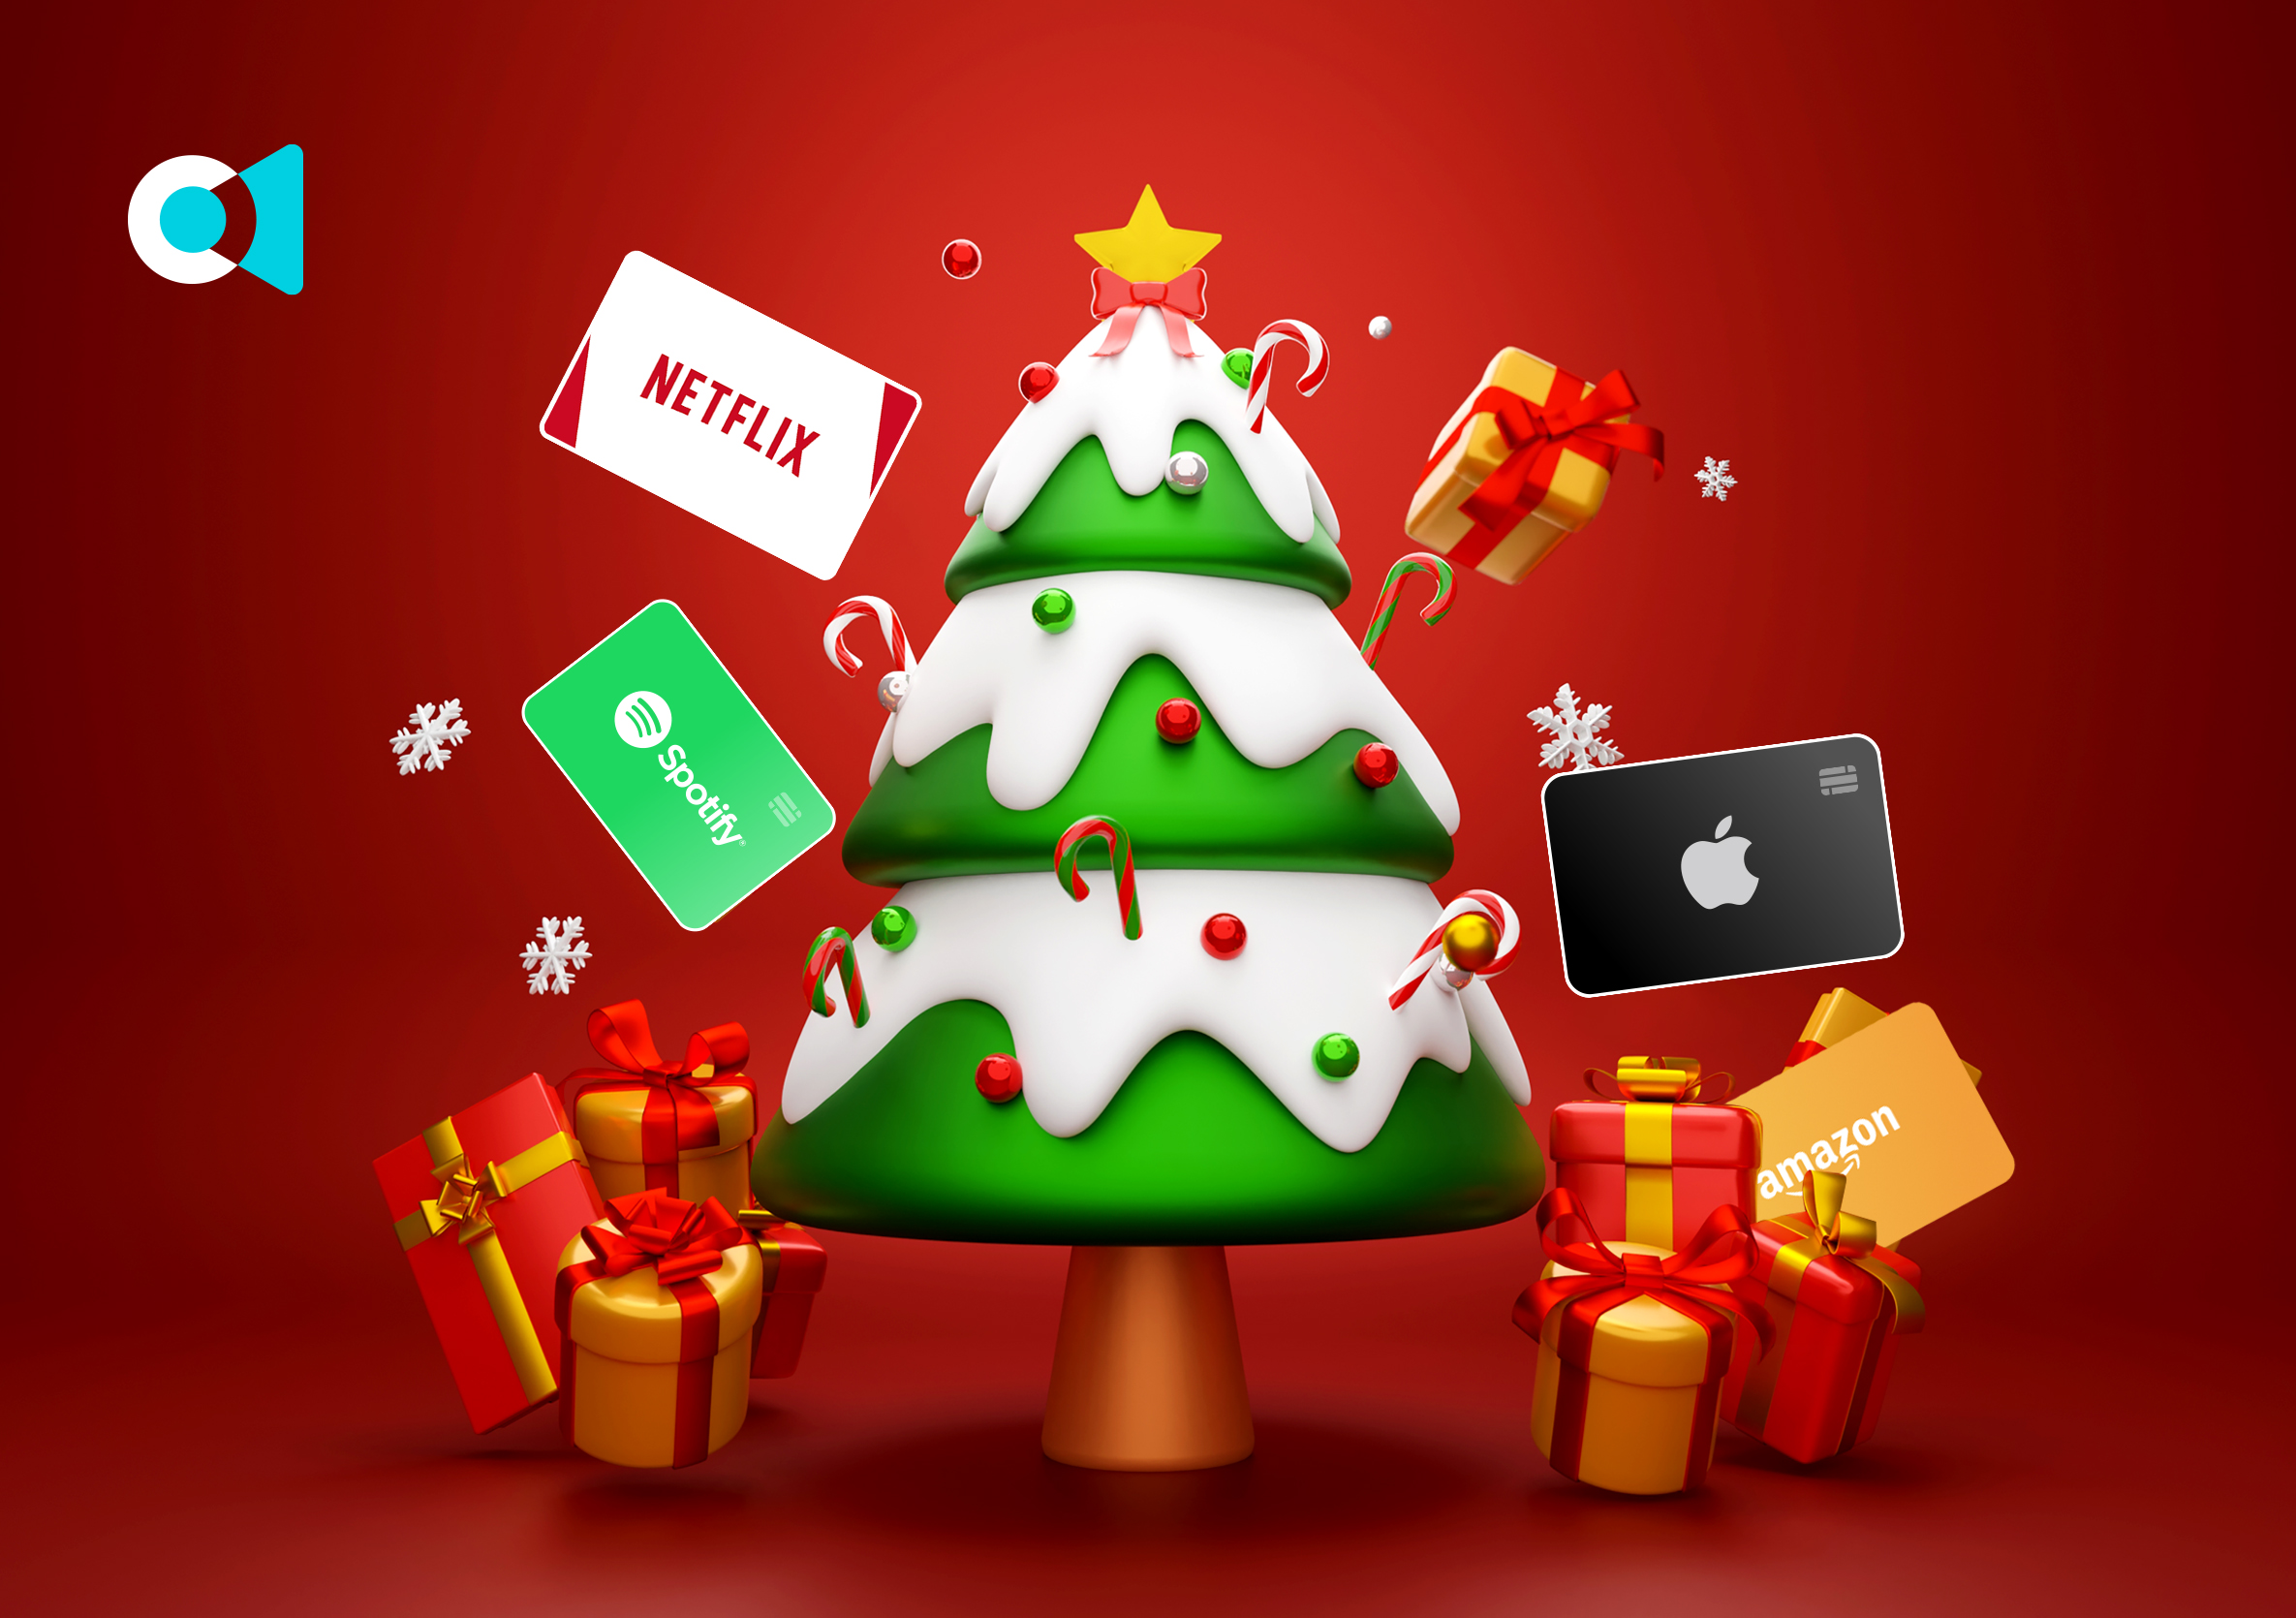 Top 7 Most Common Gift Cards You Can Buy In Brazil - Cardtonic